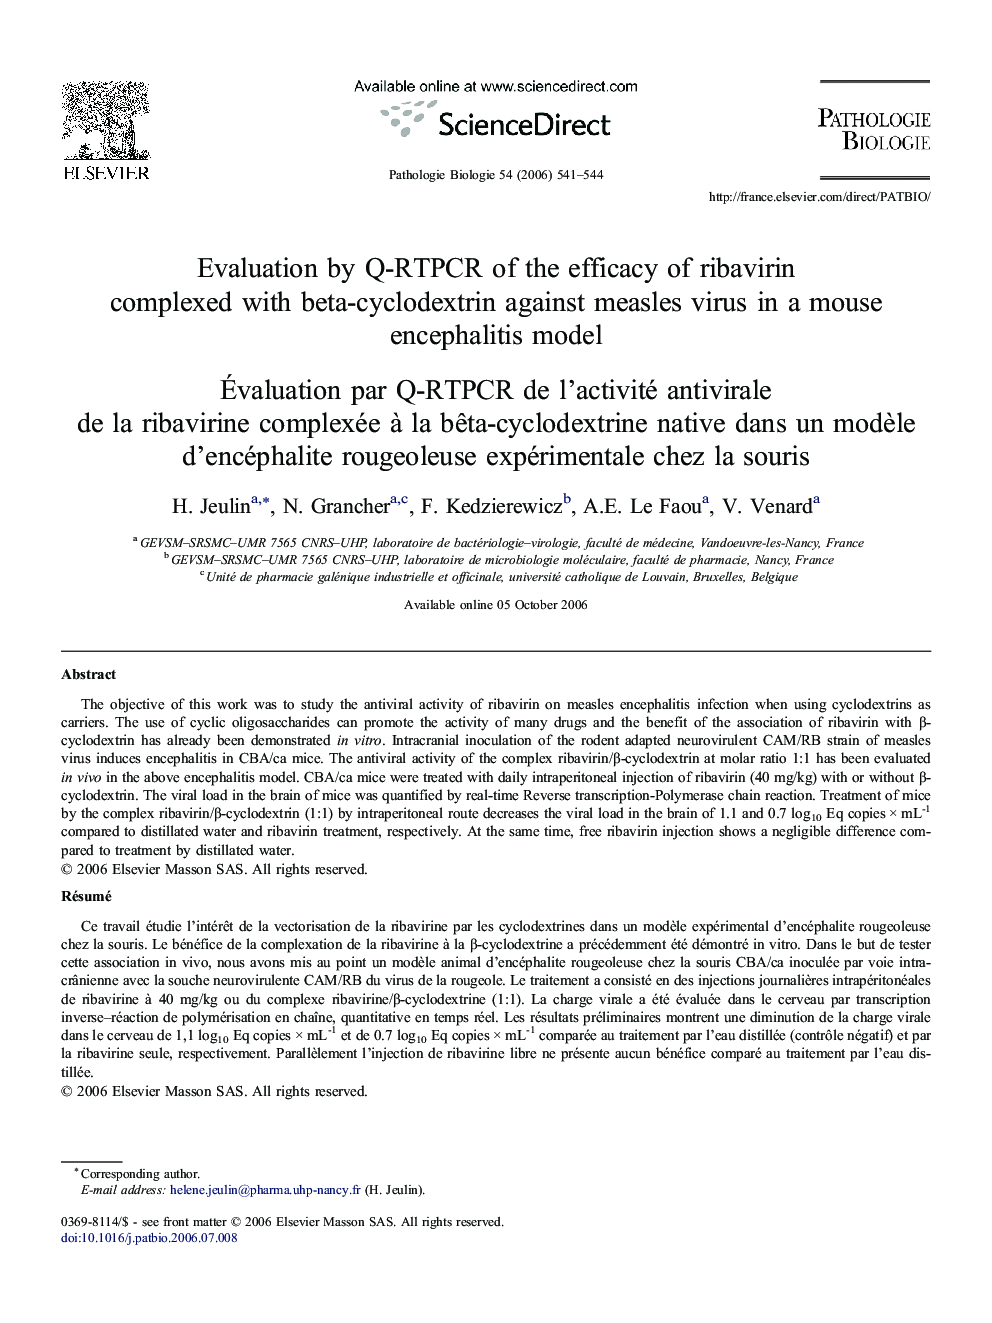 Evaluation by Q-RTPCR of the efficacy of ribavirin complexed with beta-cyclodextrin against measles virus in a mouse encephalitis model